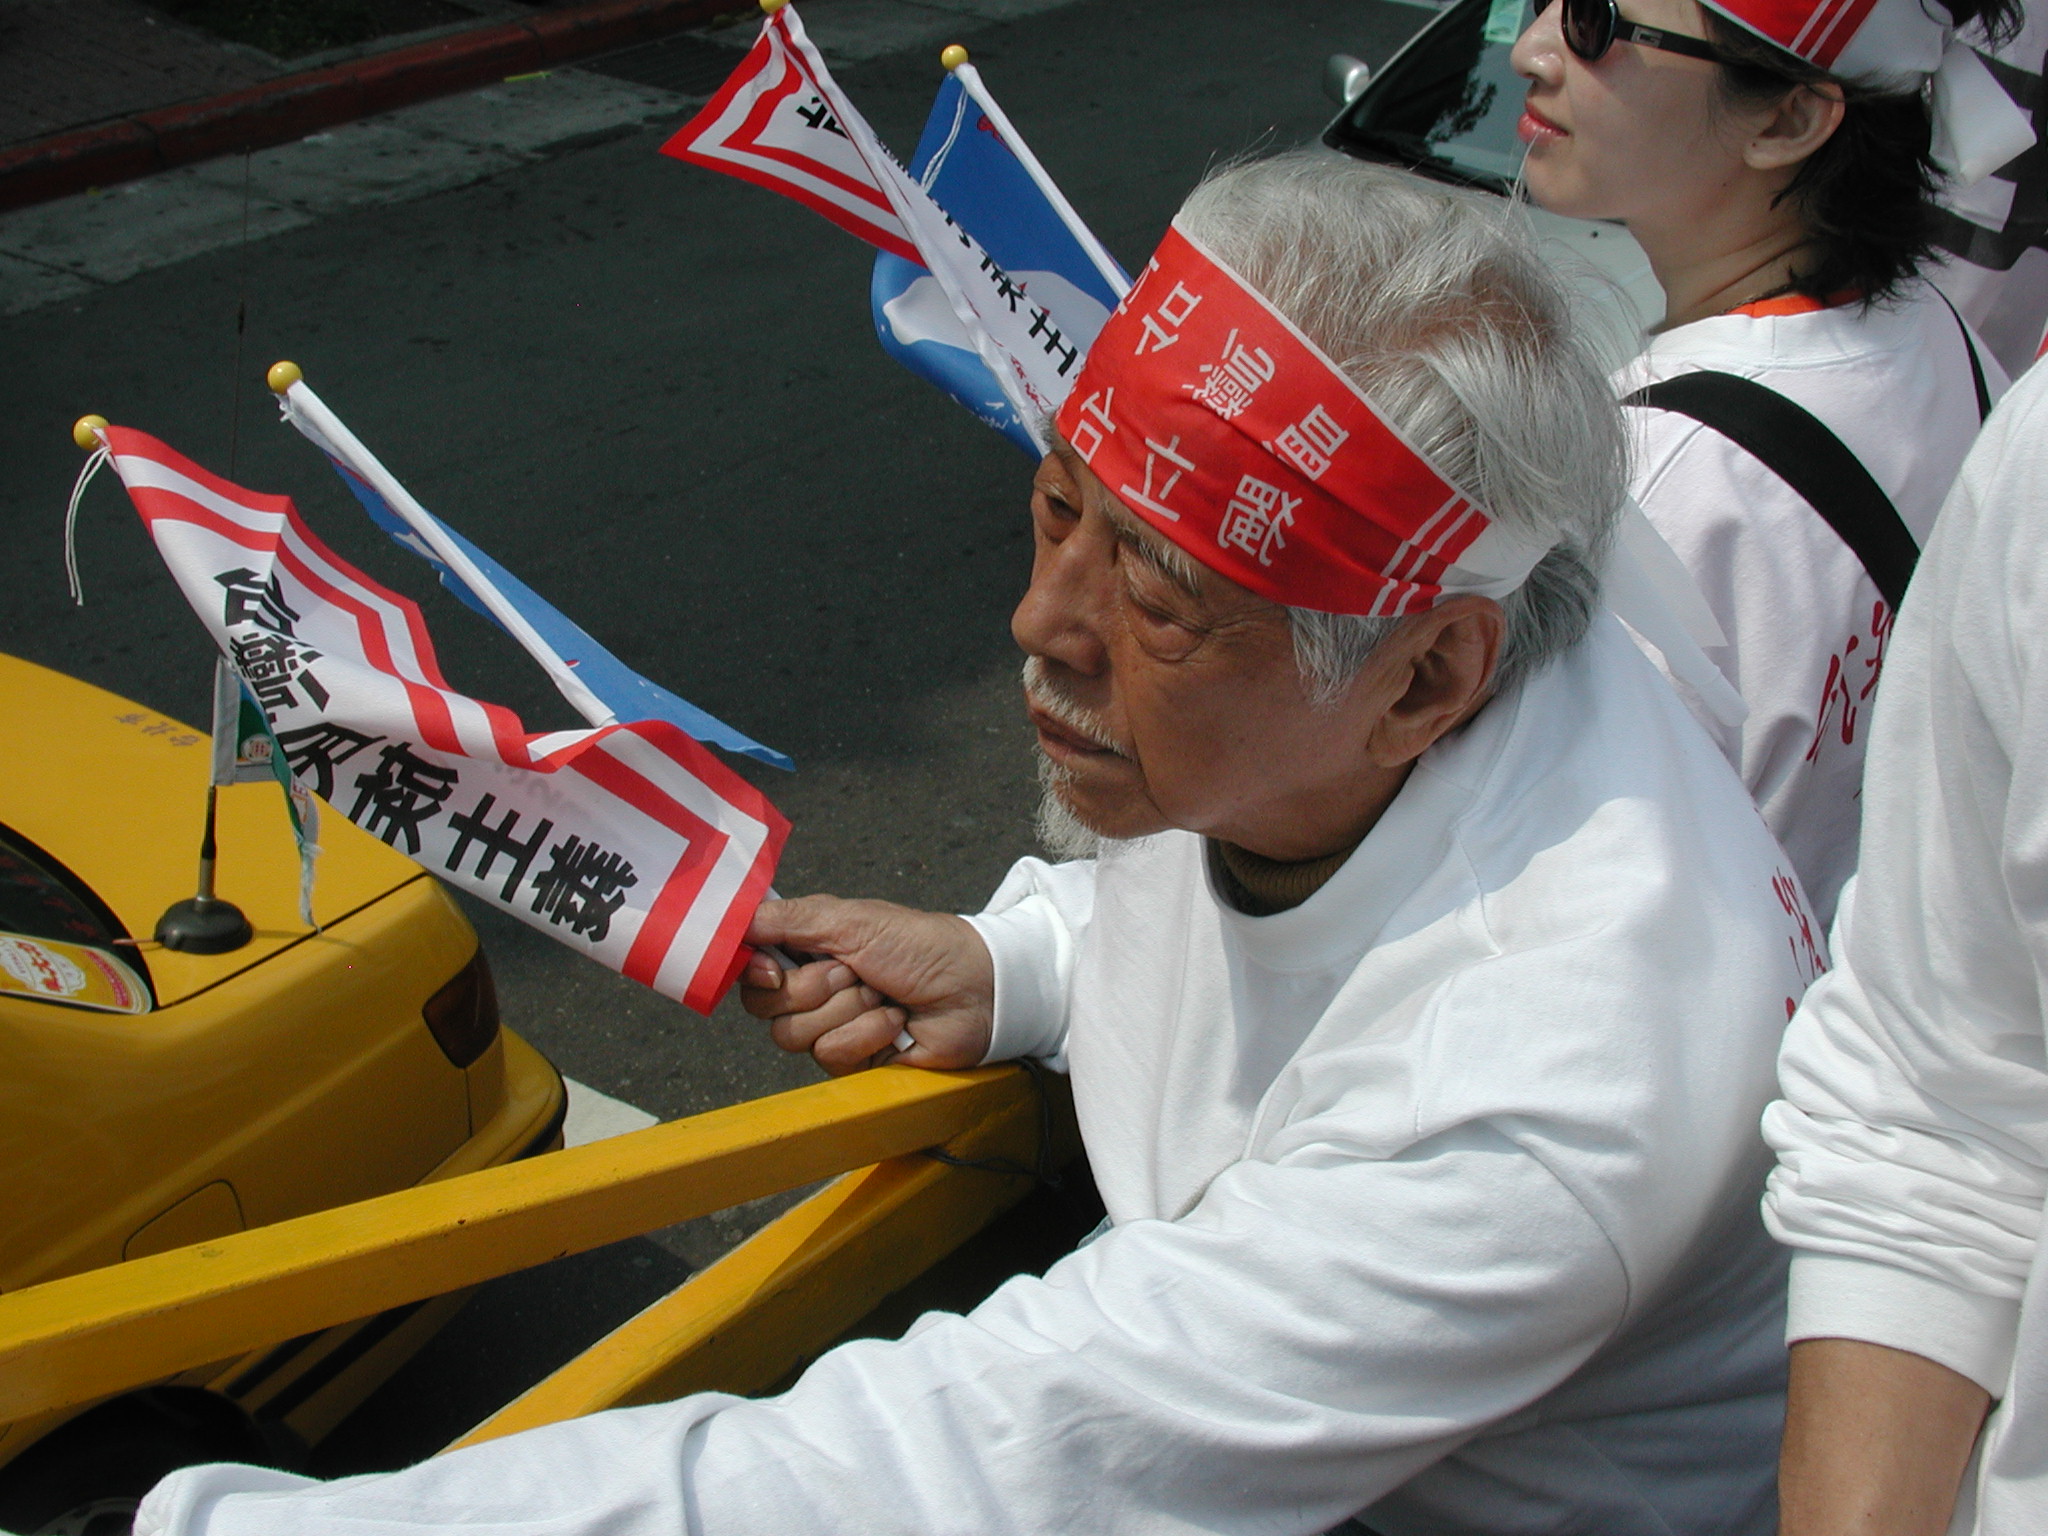 April 3, 2005- 10 Year Anniversary of the Taiwan Independence Action Motorcade